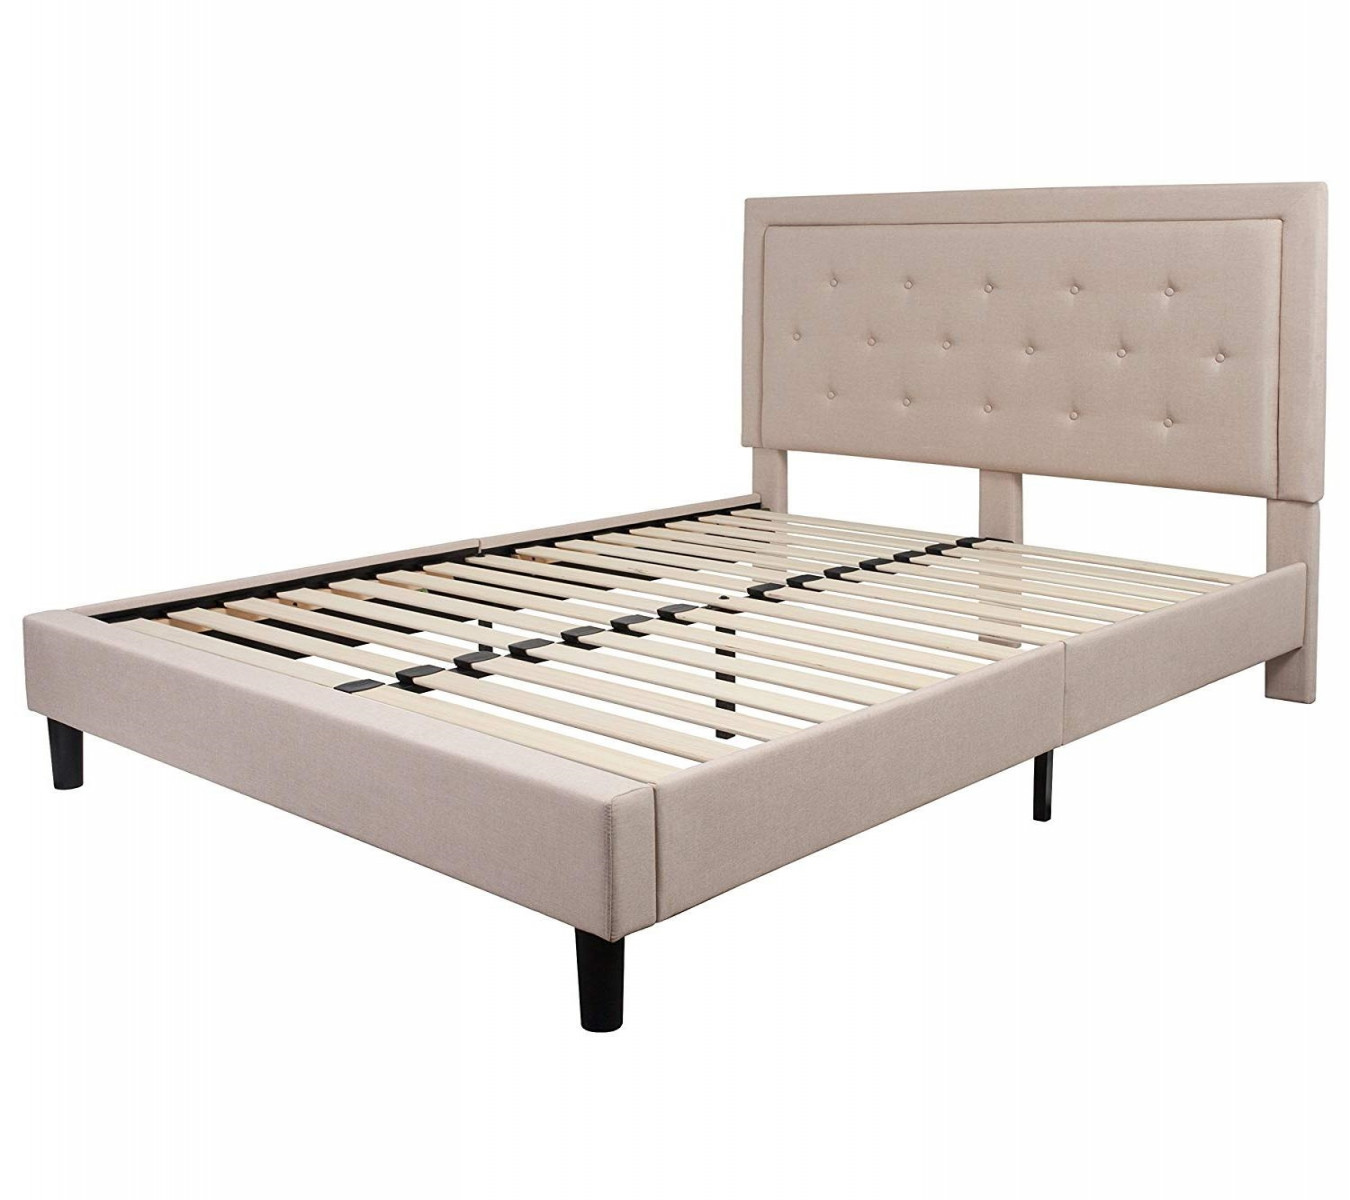 Queen Bed Frame With Tufted Headboard Ireland, SAVE